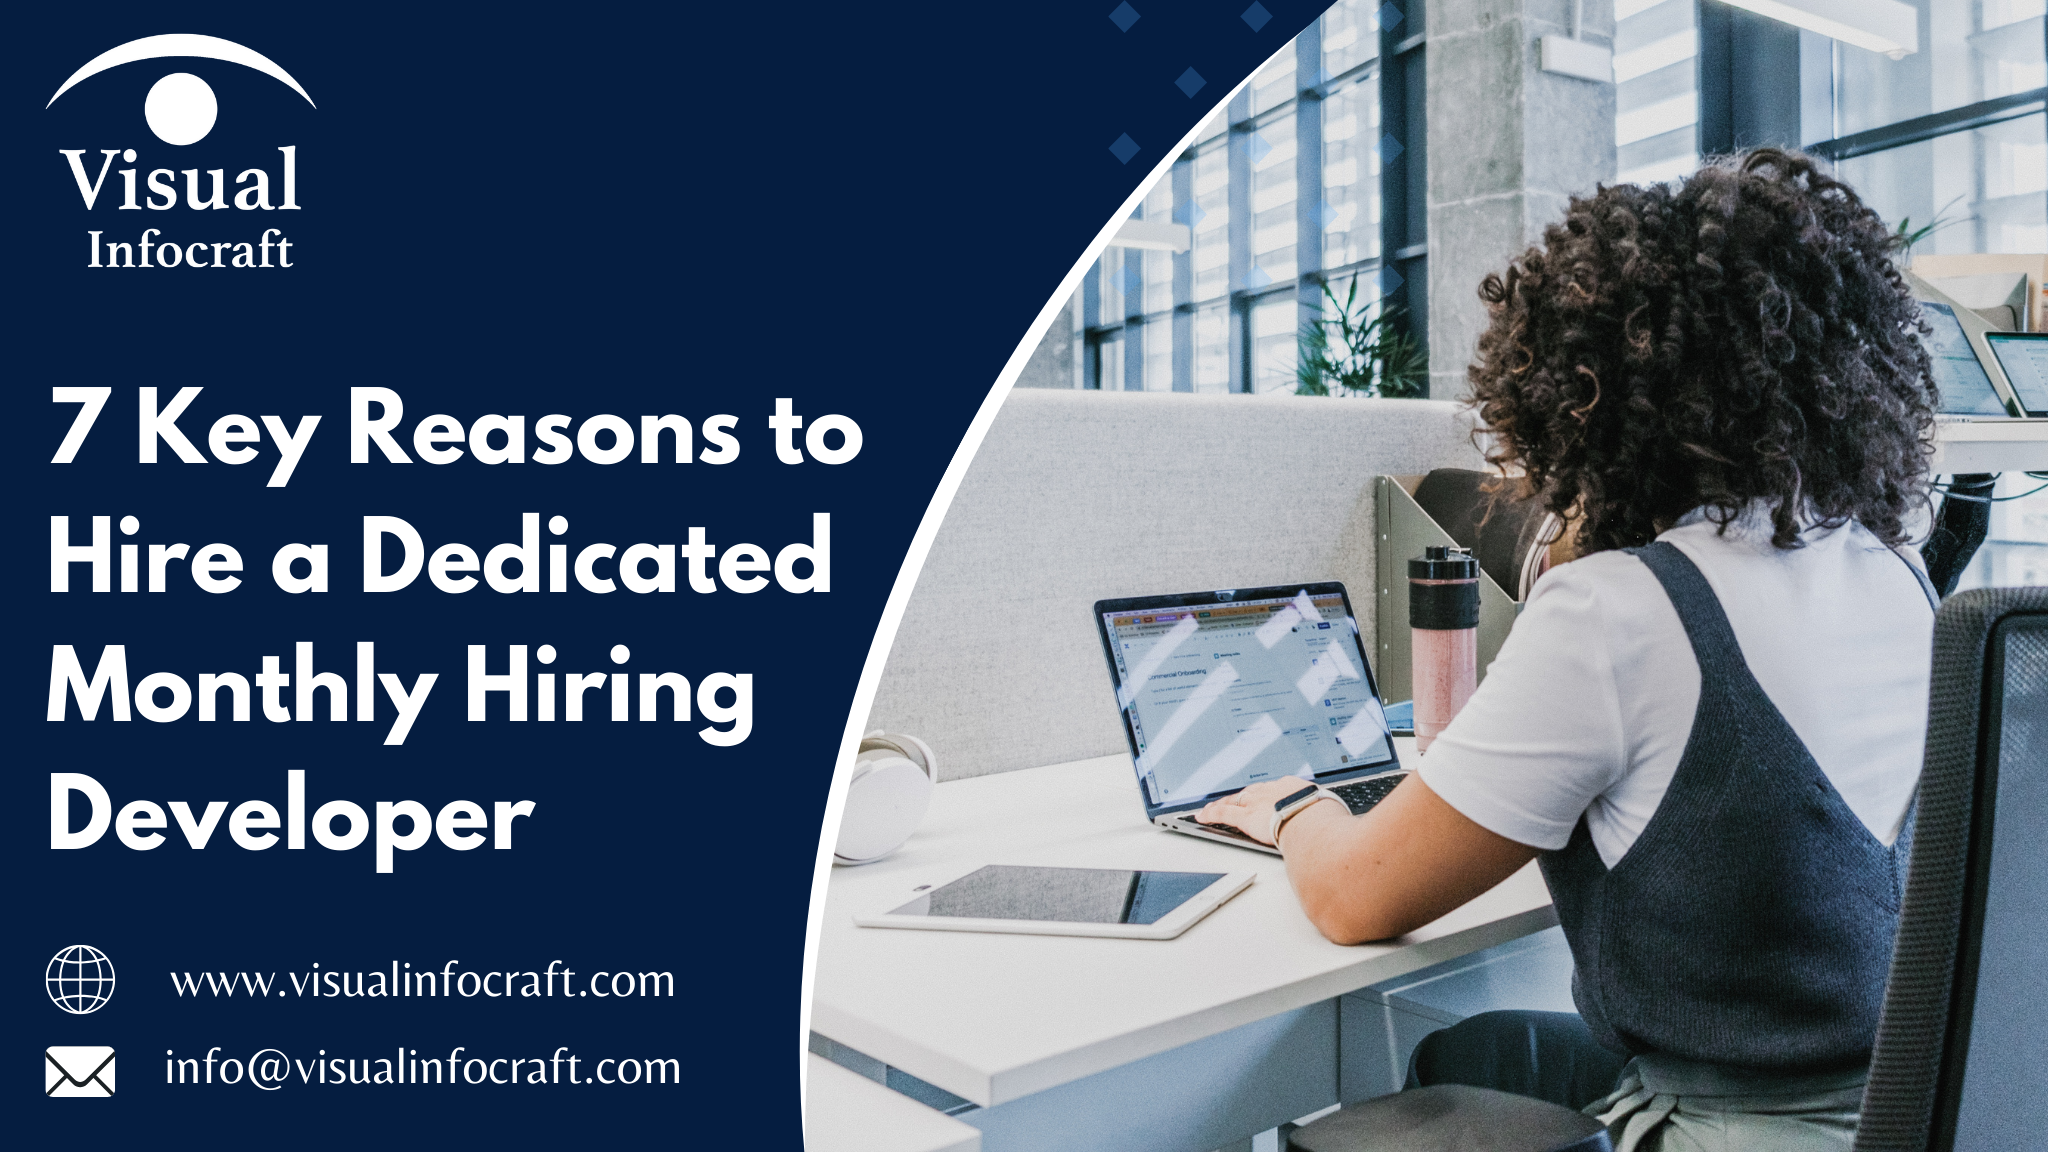 7 Key Reasons to Hire a Dedicated Monthly Hiring Developer